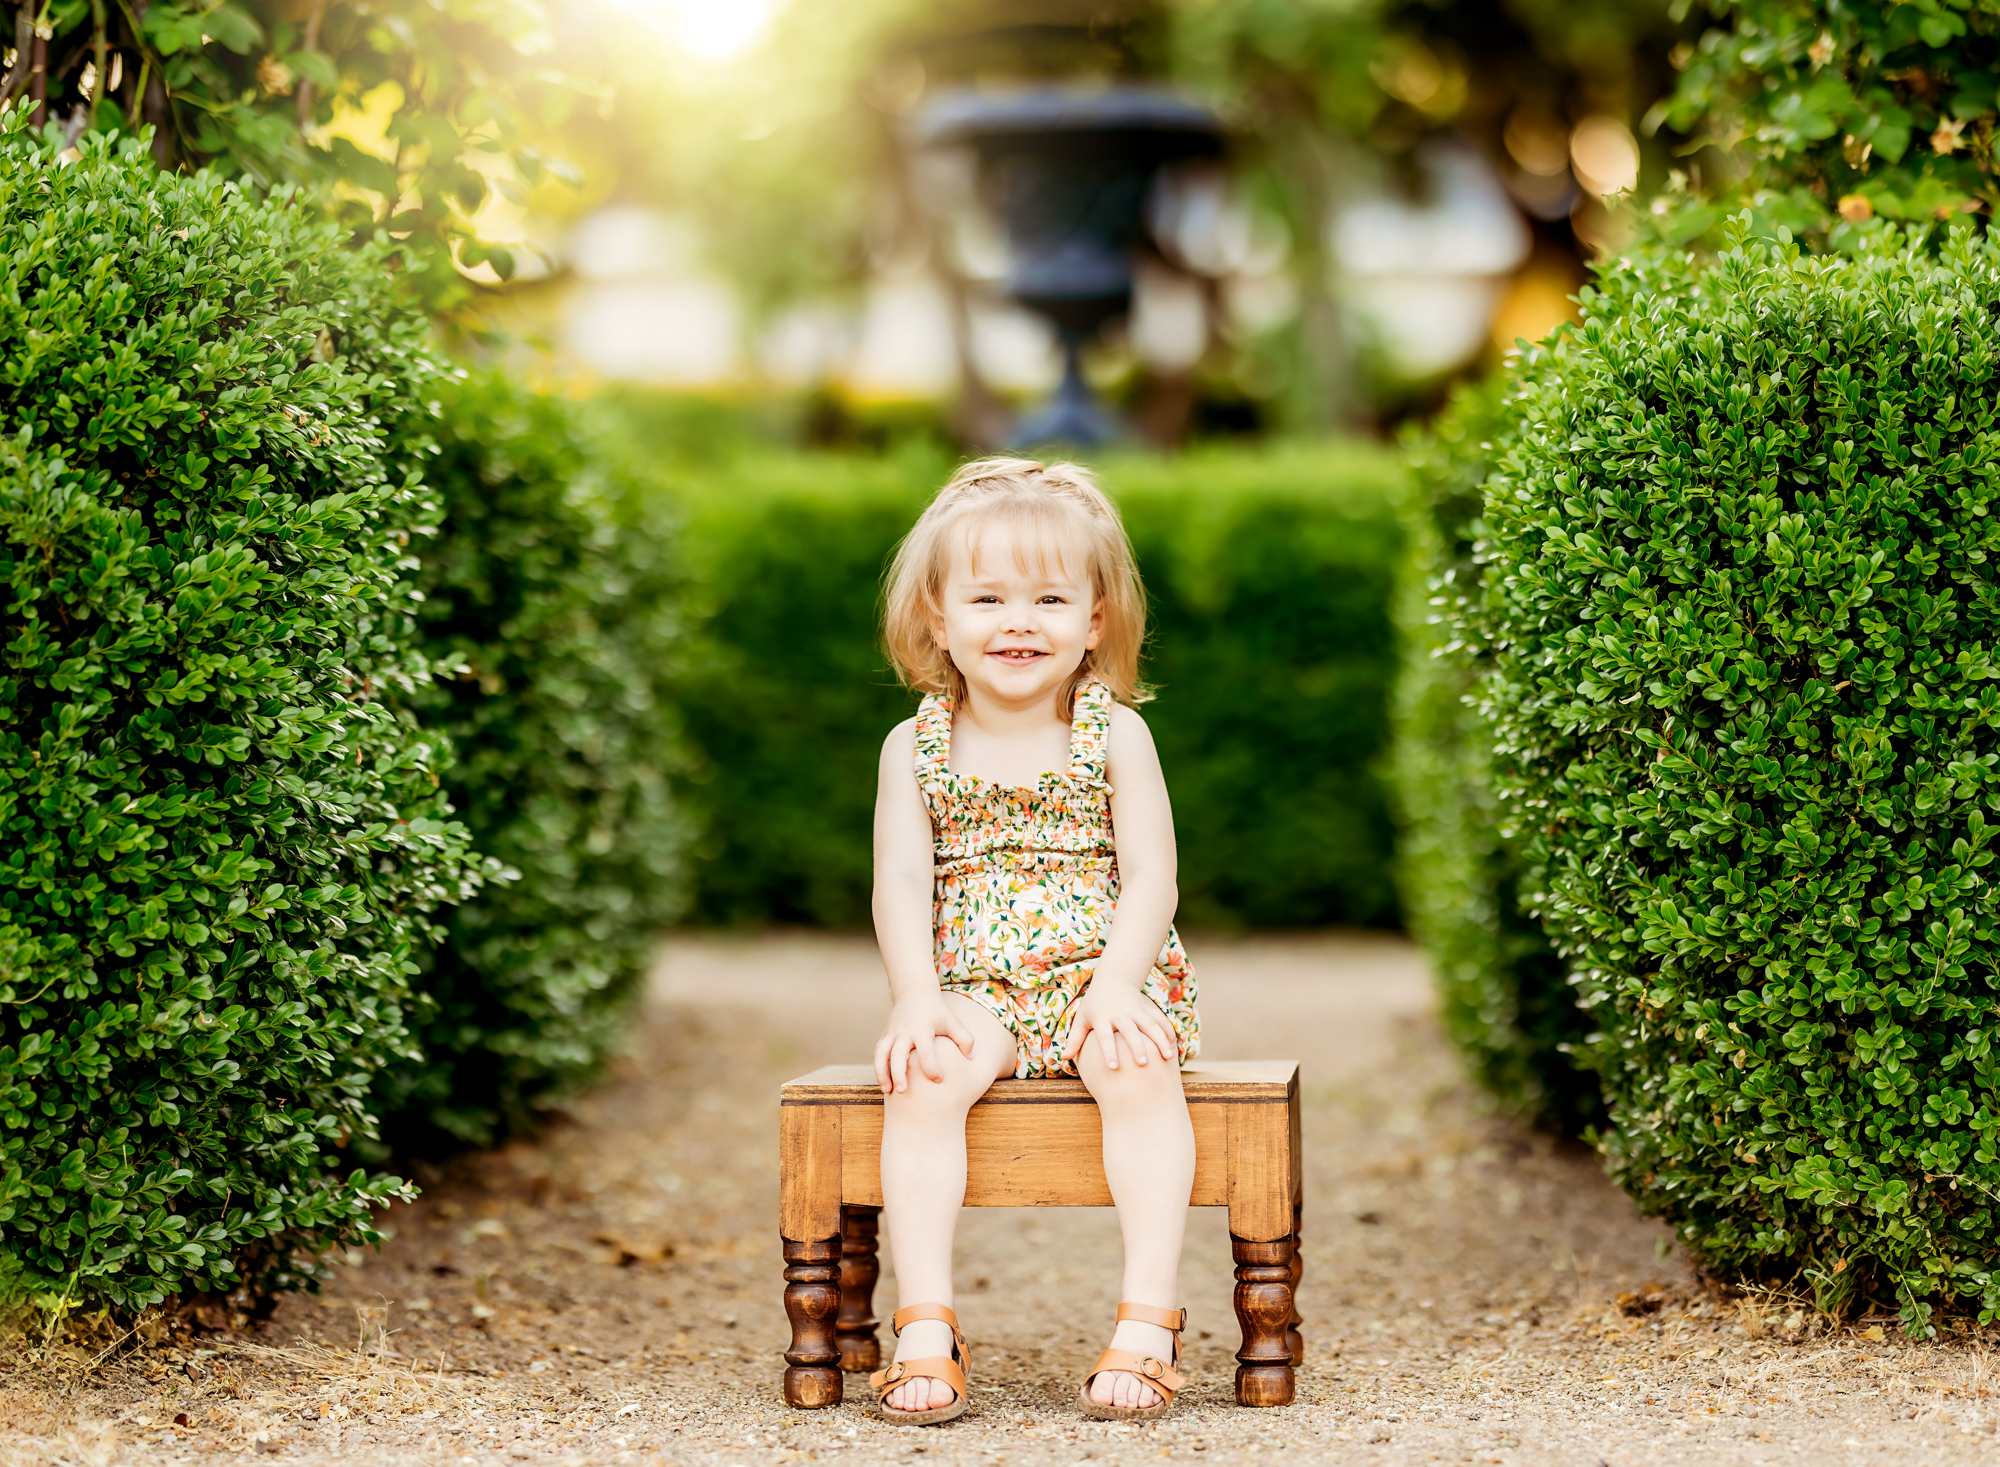 3 tips for photographing toddlers